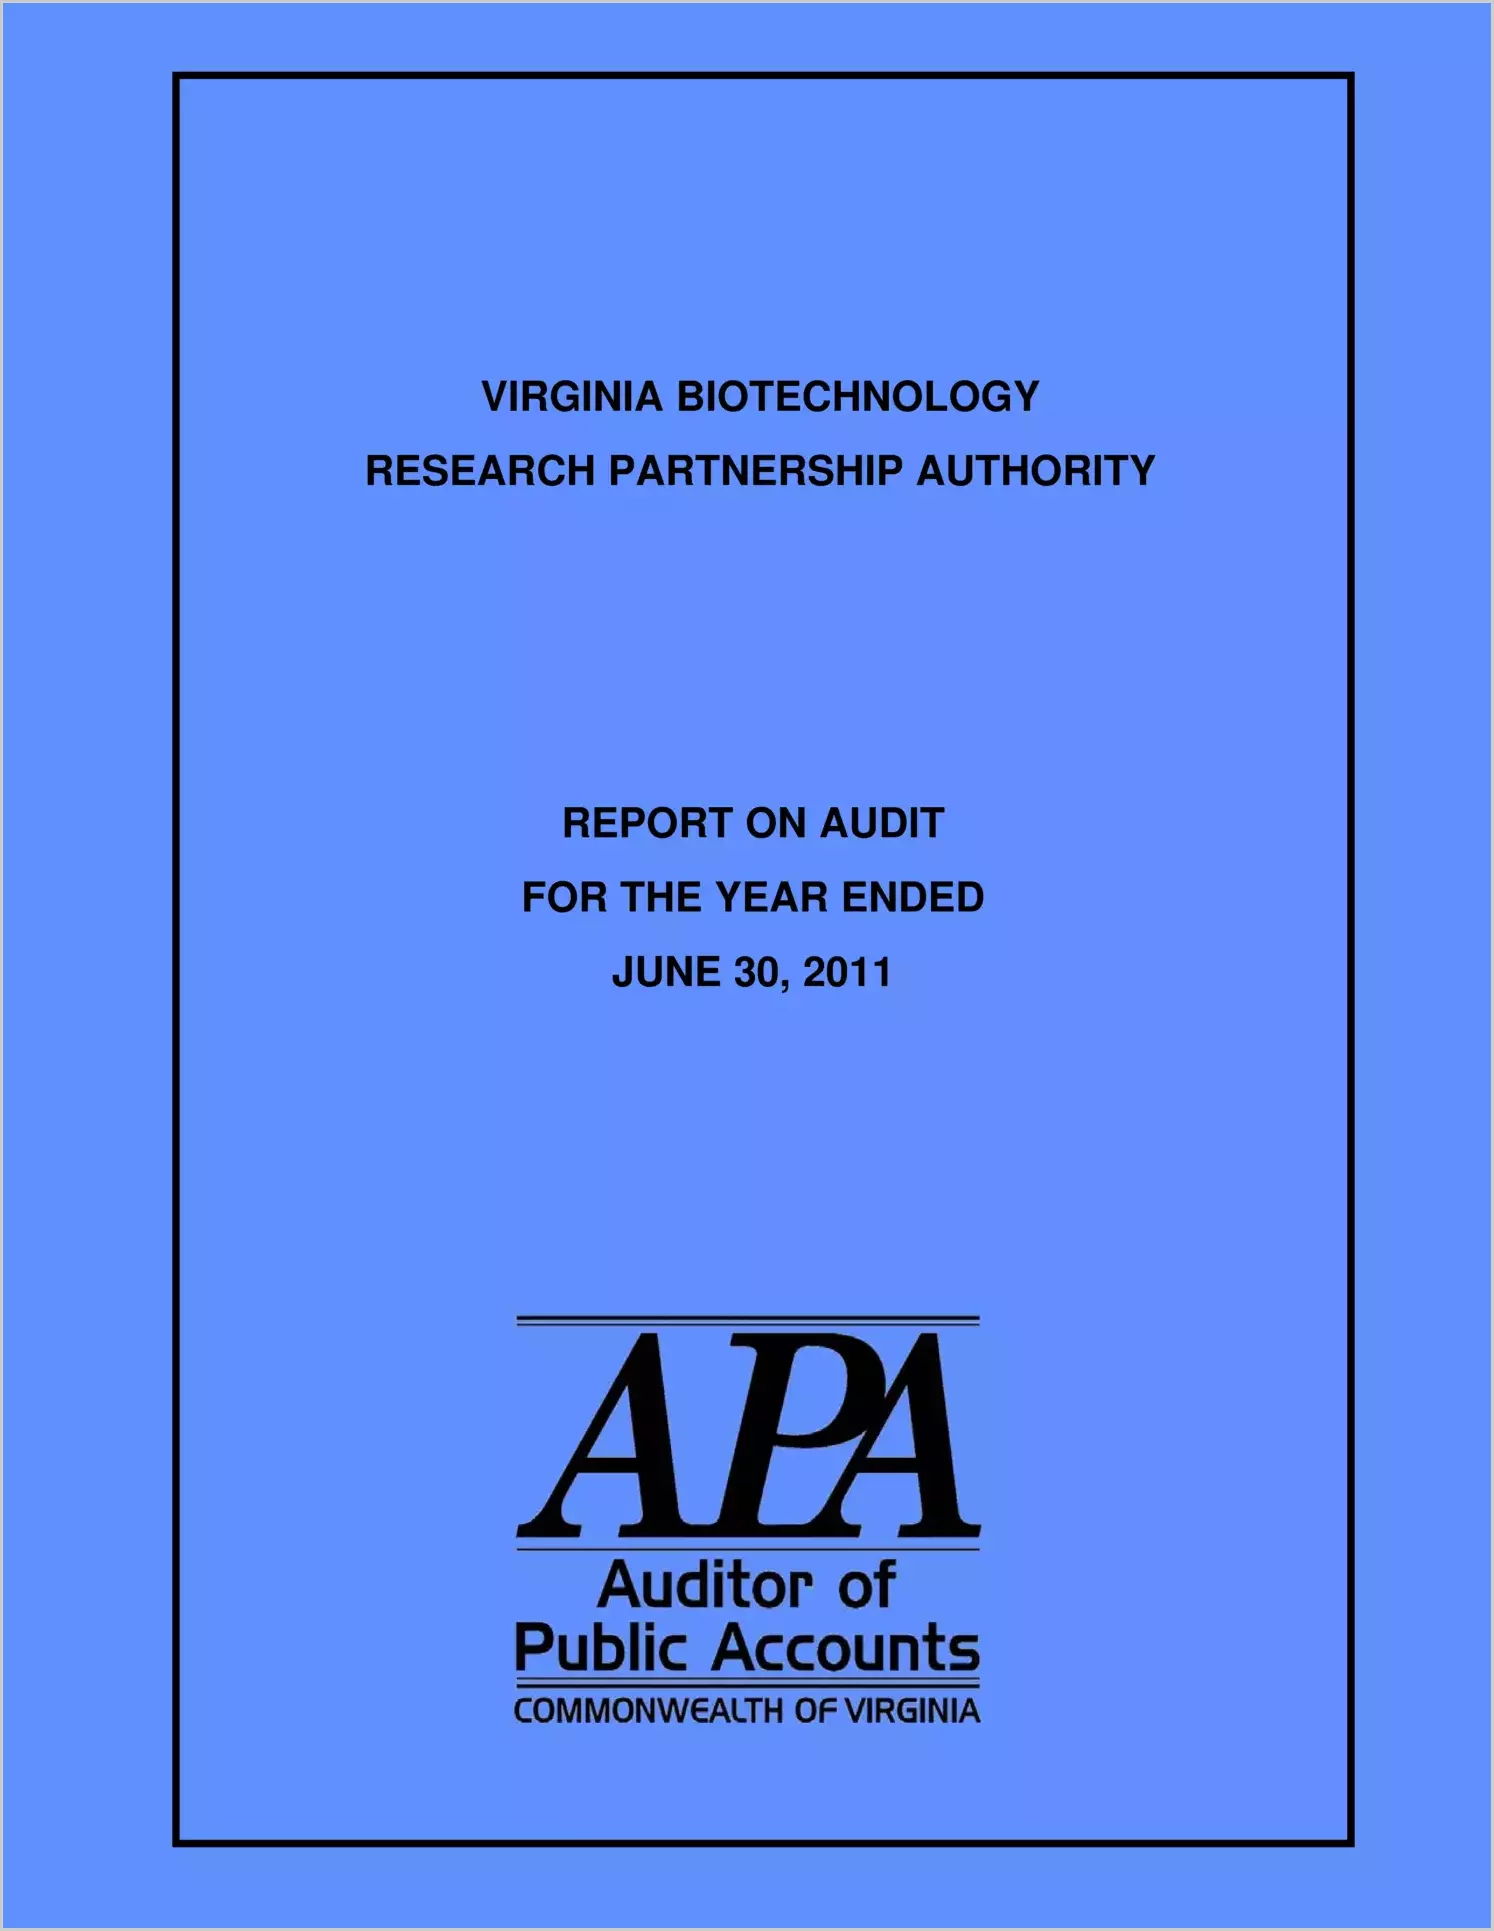 Virginia Biotechnology Research Partnership Authority for the year ended June 30, 2011